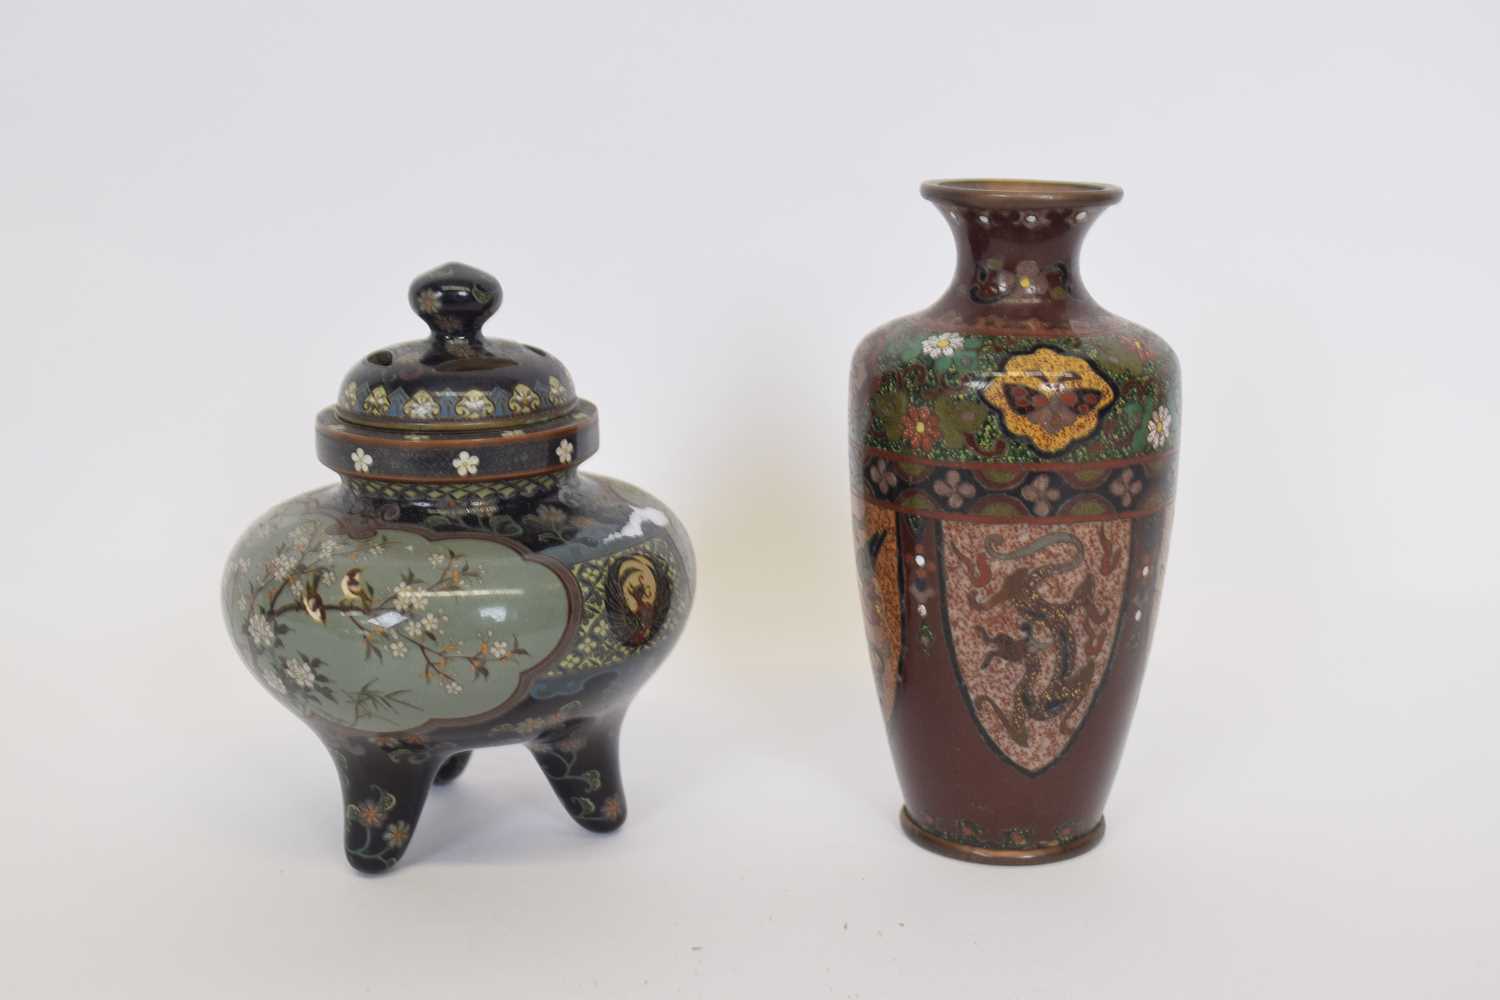 Small Japanese Meiji period cloisonne incense burner with panels of decoration of birds together